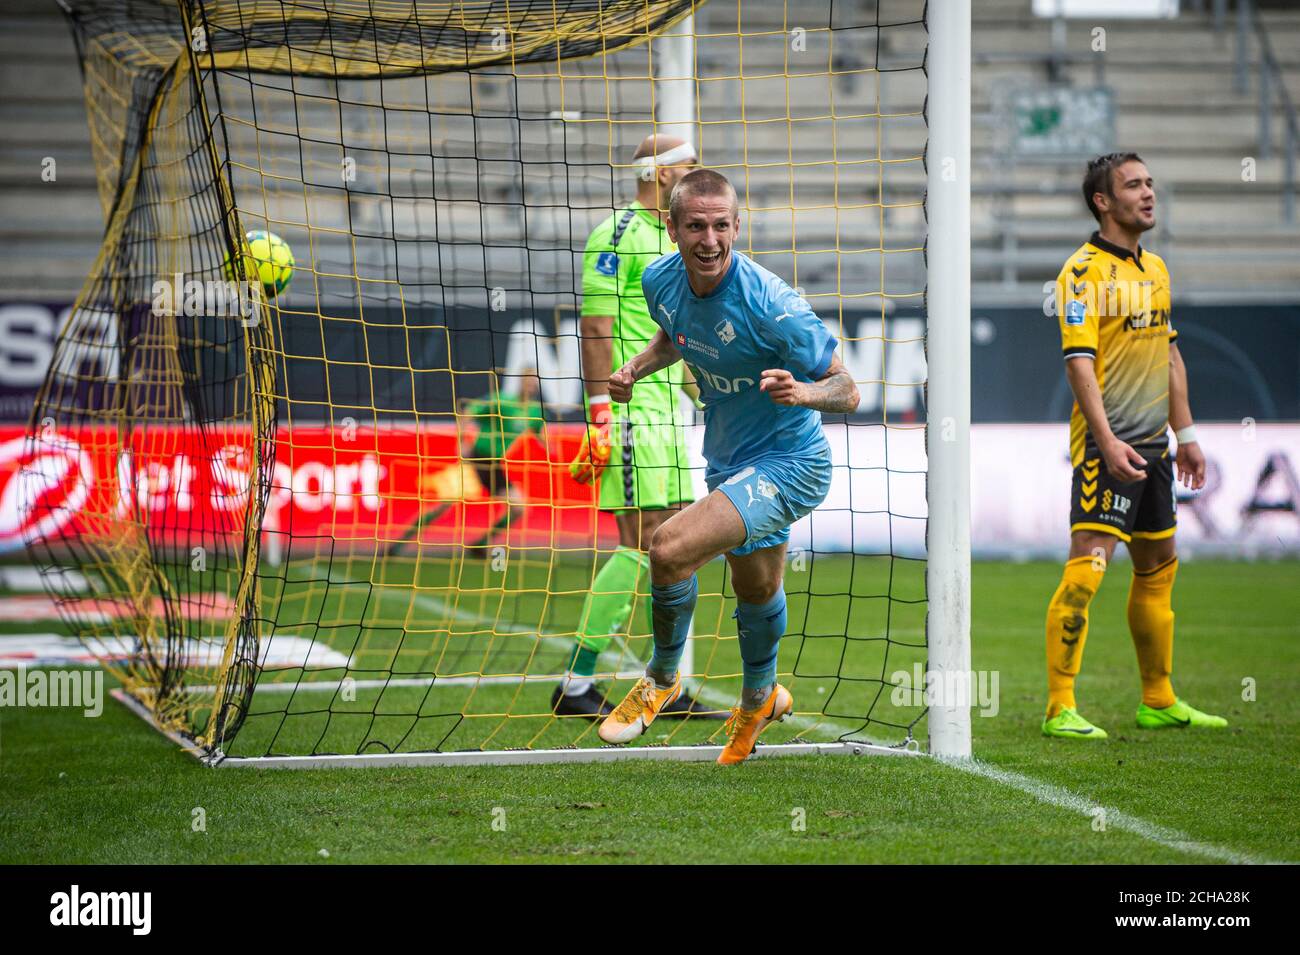 Horsens, Denmark. 13th Sep, 2020. Emil Riis Jakobsen (9) of Randers FC  scores for 0-3 during the 3F Superliga match between AC Horsens and Randers  FC at Casa Arena in Horsens. (Photo